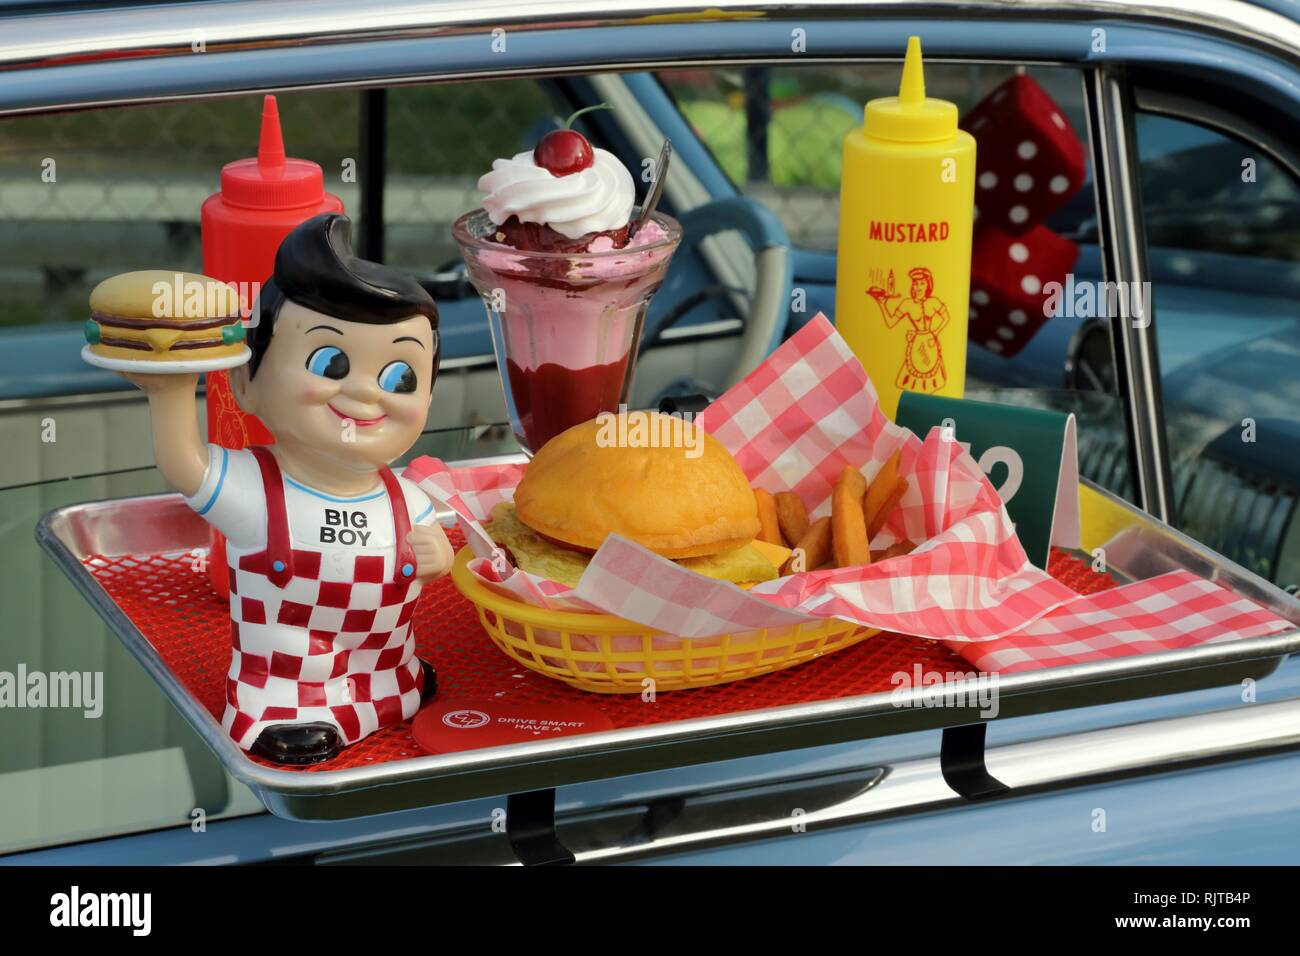 Los Angeles, CA / USA - Oct. 23, 2016: A classic Bob's Big Boy car hop tray is depicted on the window of a vintage car. Stock Photo